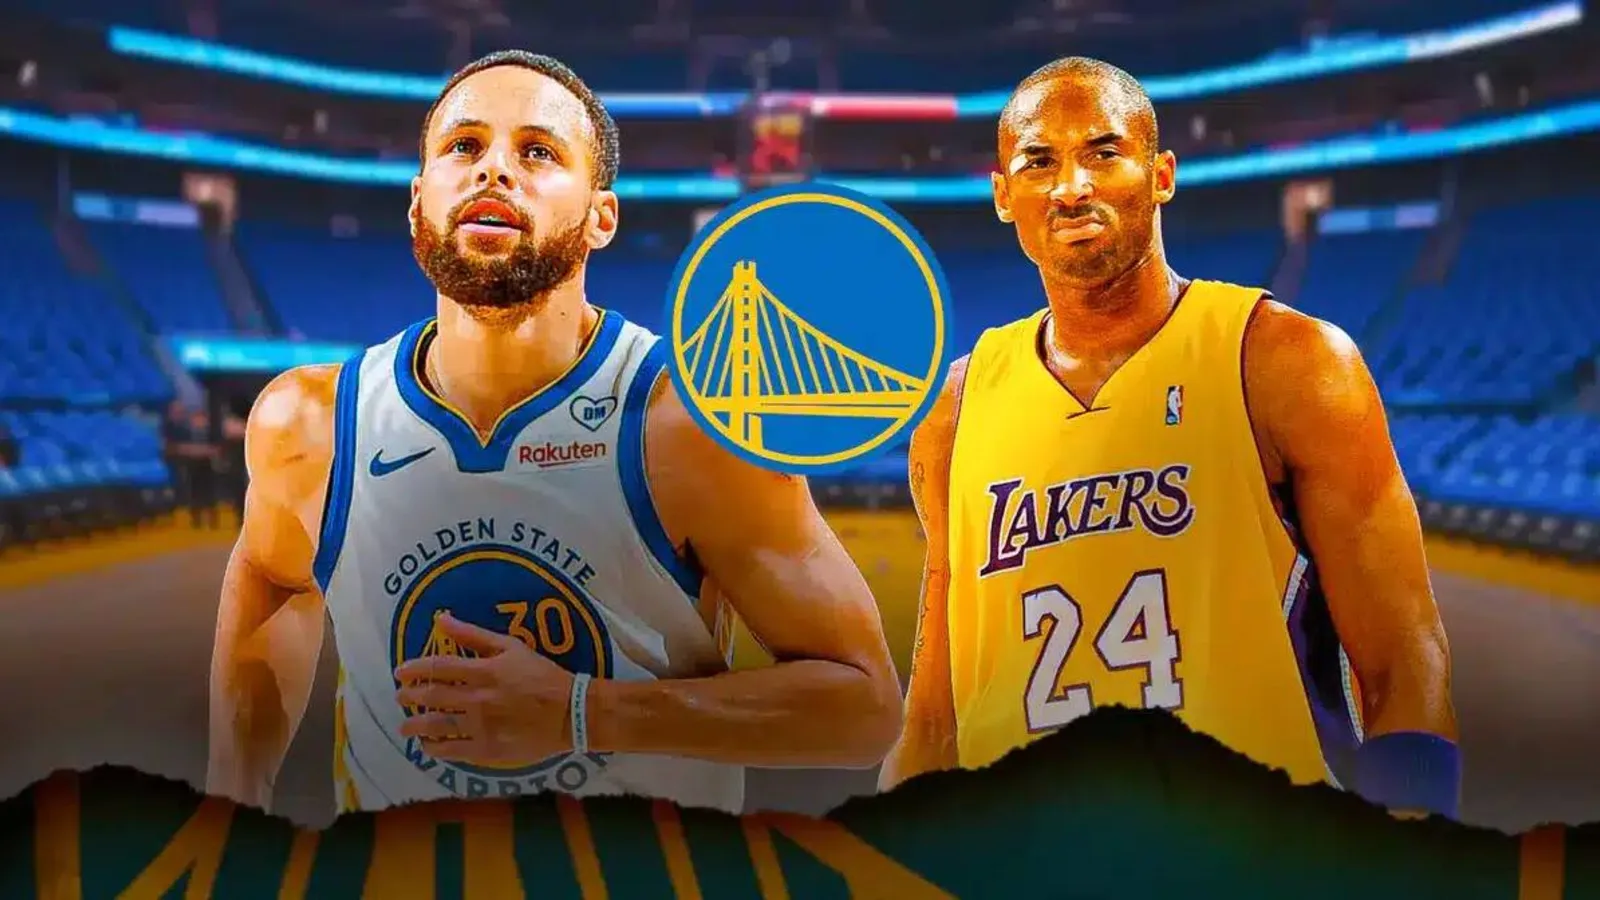 Stephen Curry enters exclusive Kobe Bryant Club with 60 point explosion